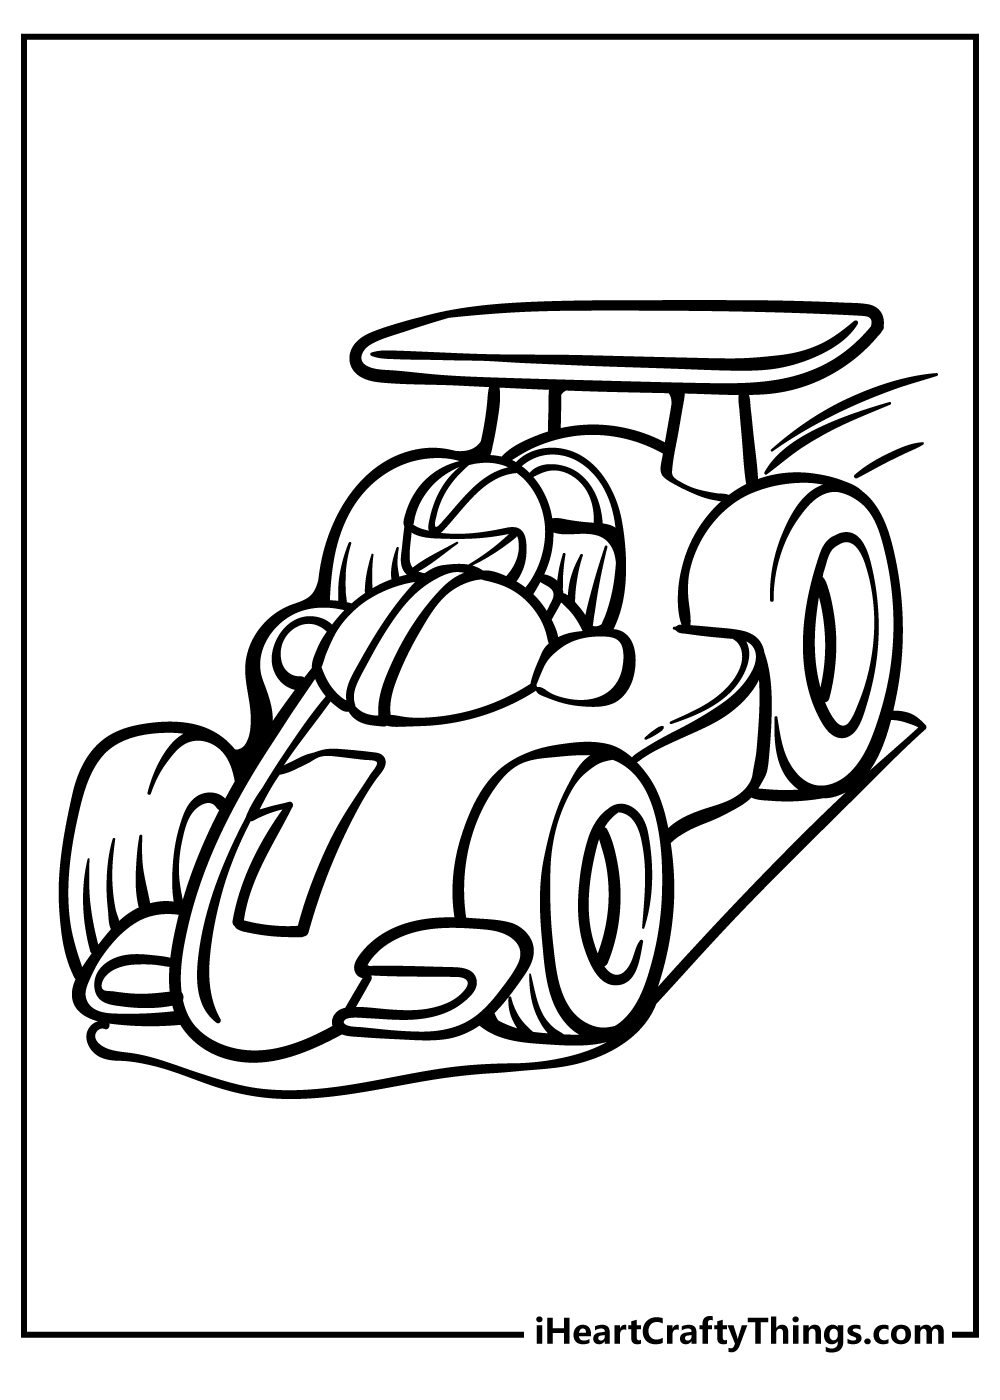 Race Car Coloring Pages for adults free printable